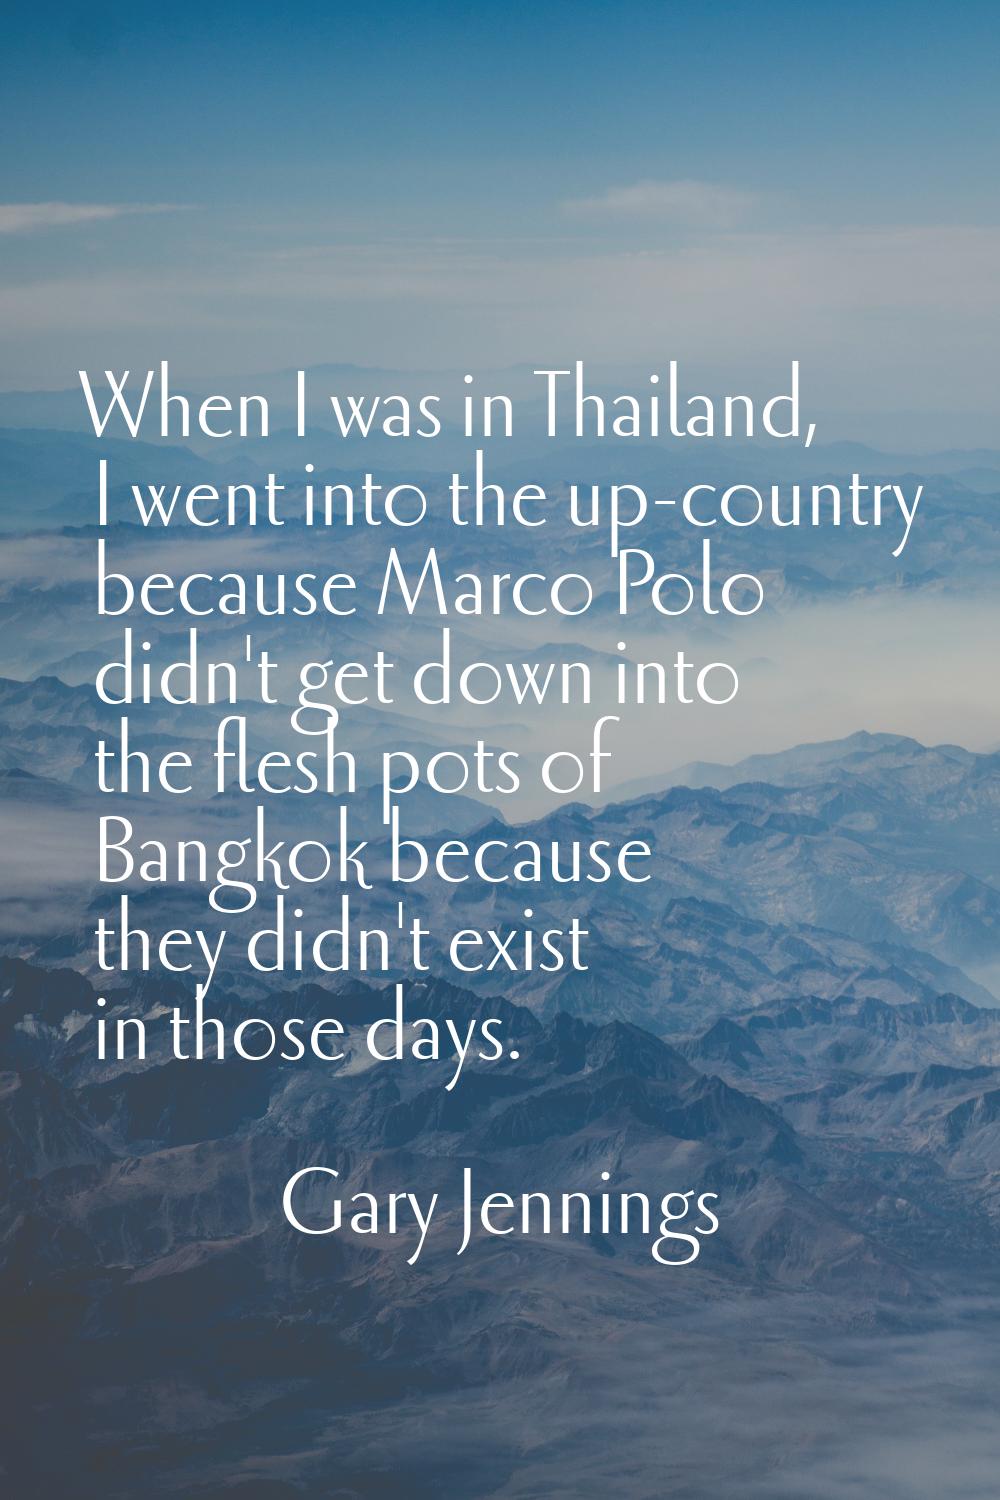 When I was in Thailand, I went into the up-country because Marco Polo didn't get down into the fles